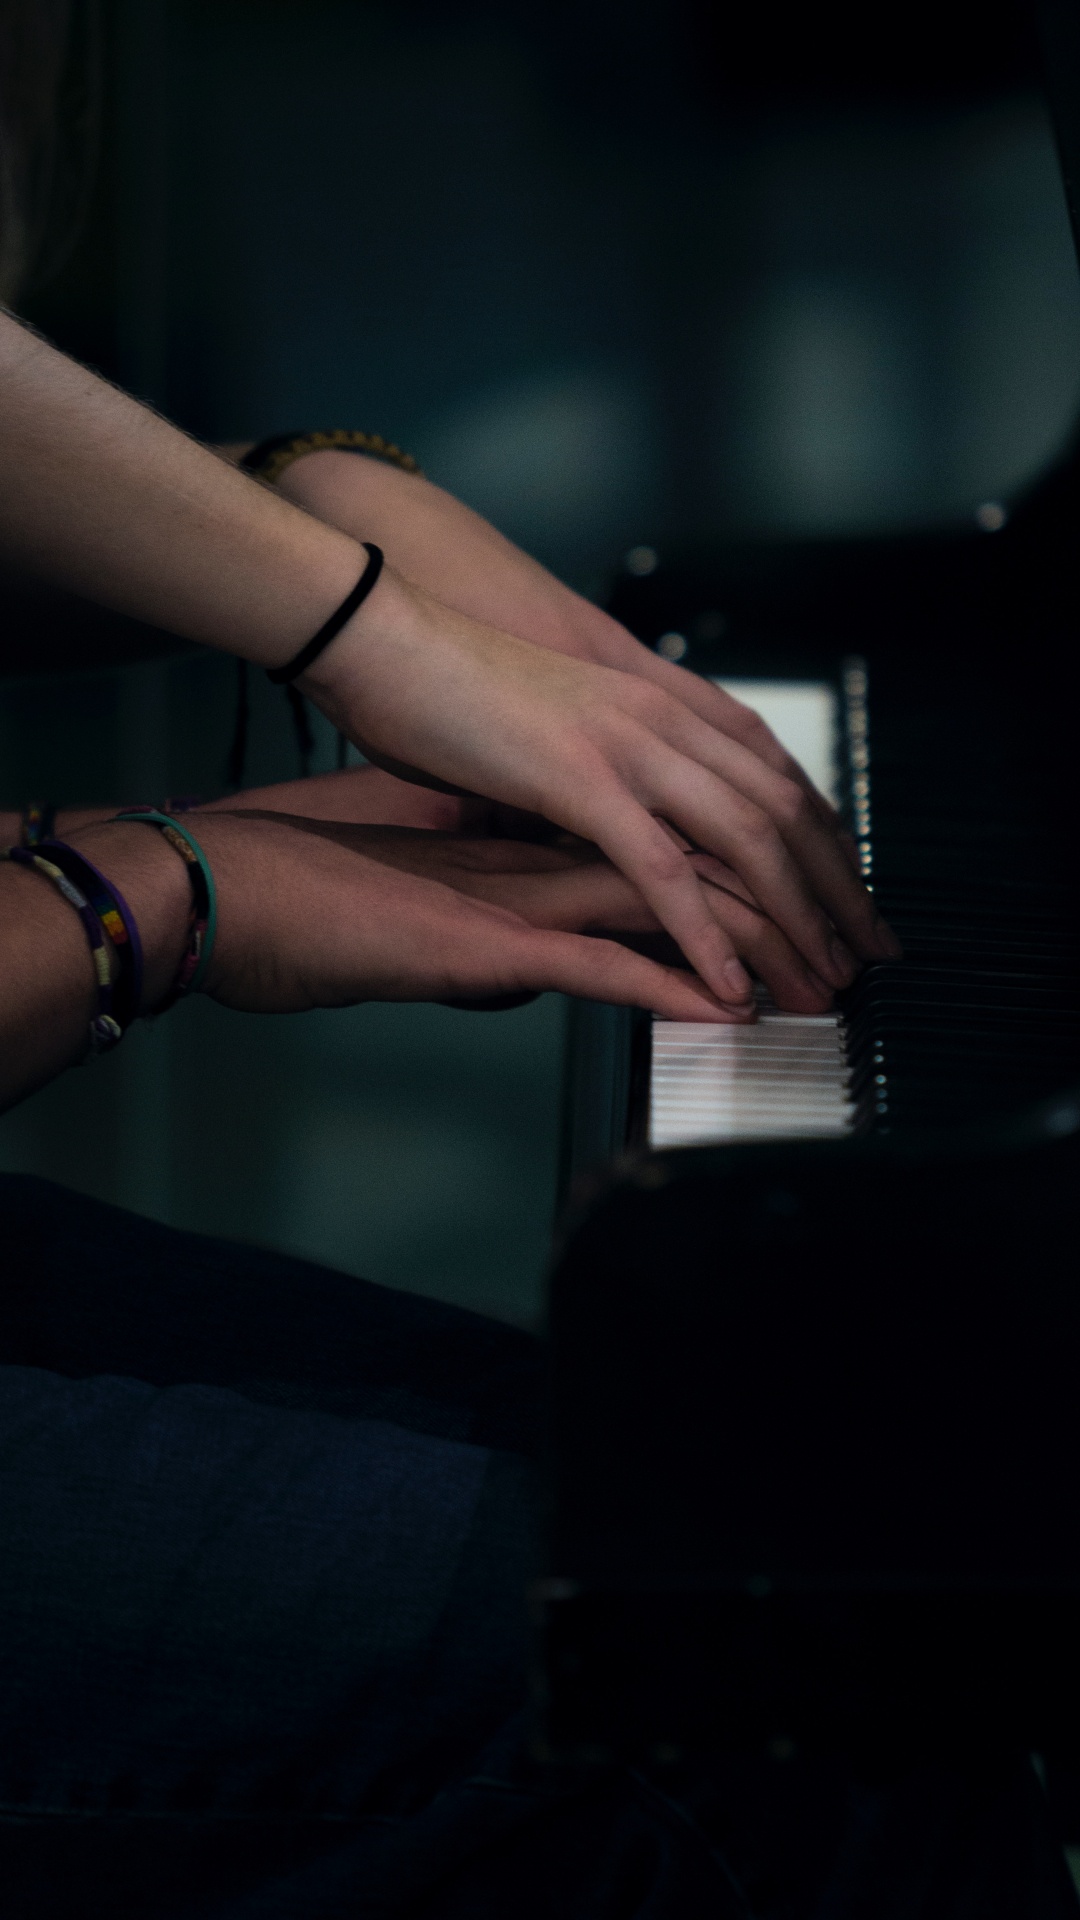 Piano, Pianist, Hand, Musician, Arm. Wallpaper in 1080x1920 Resolution